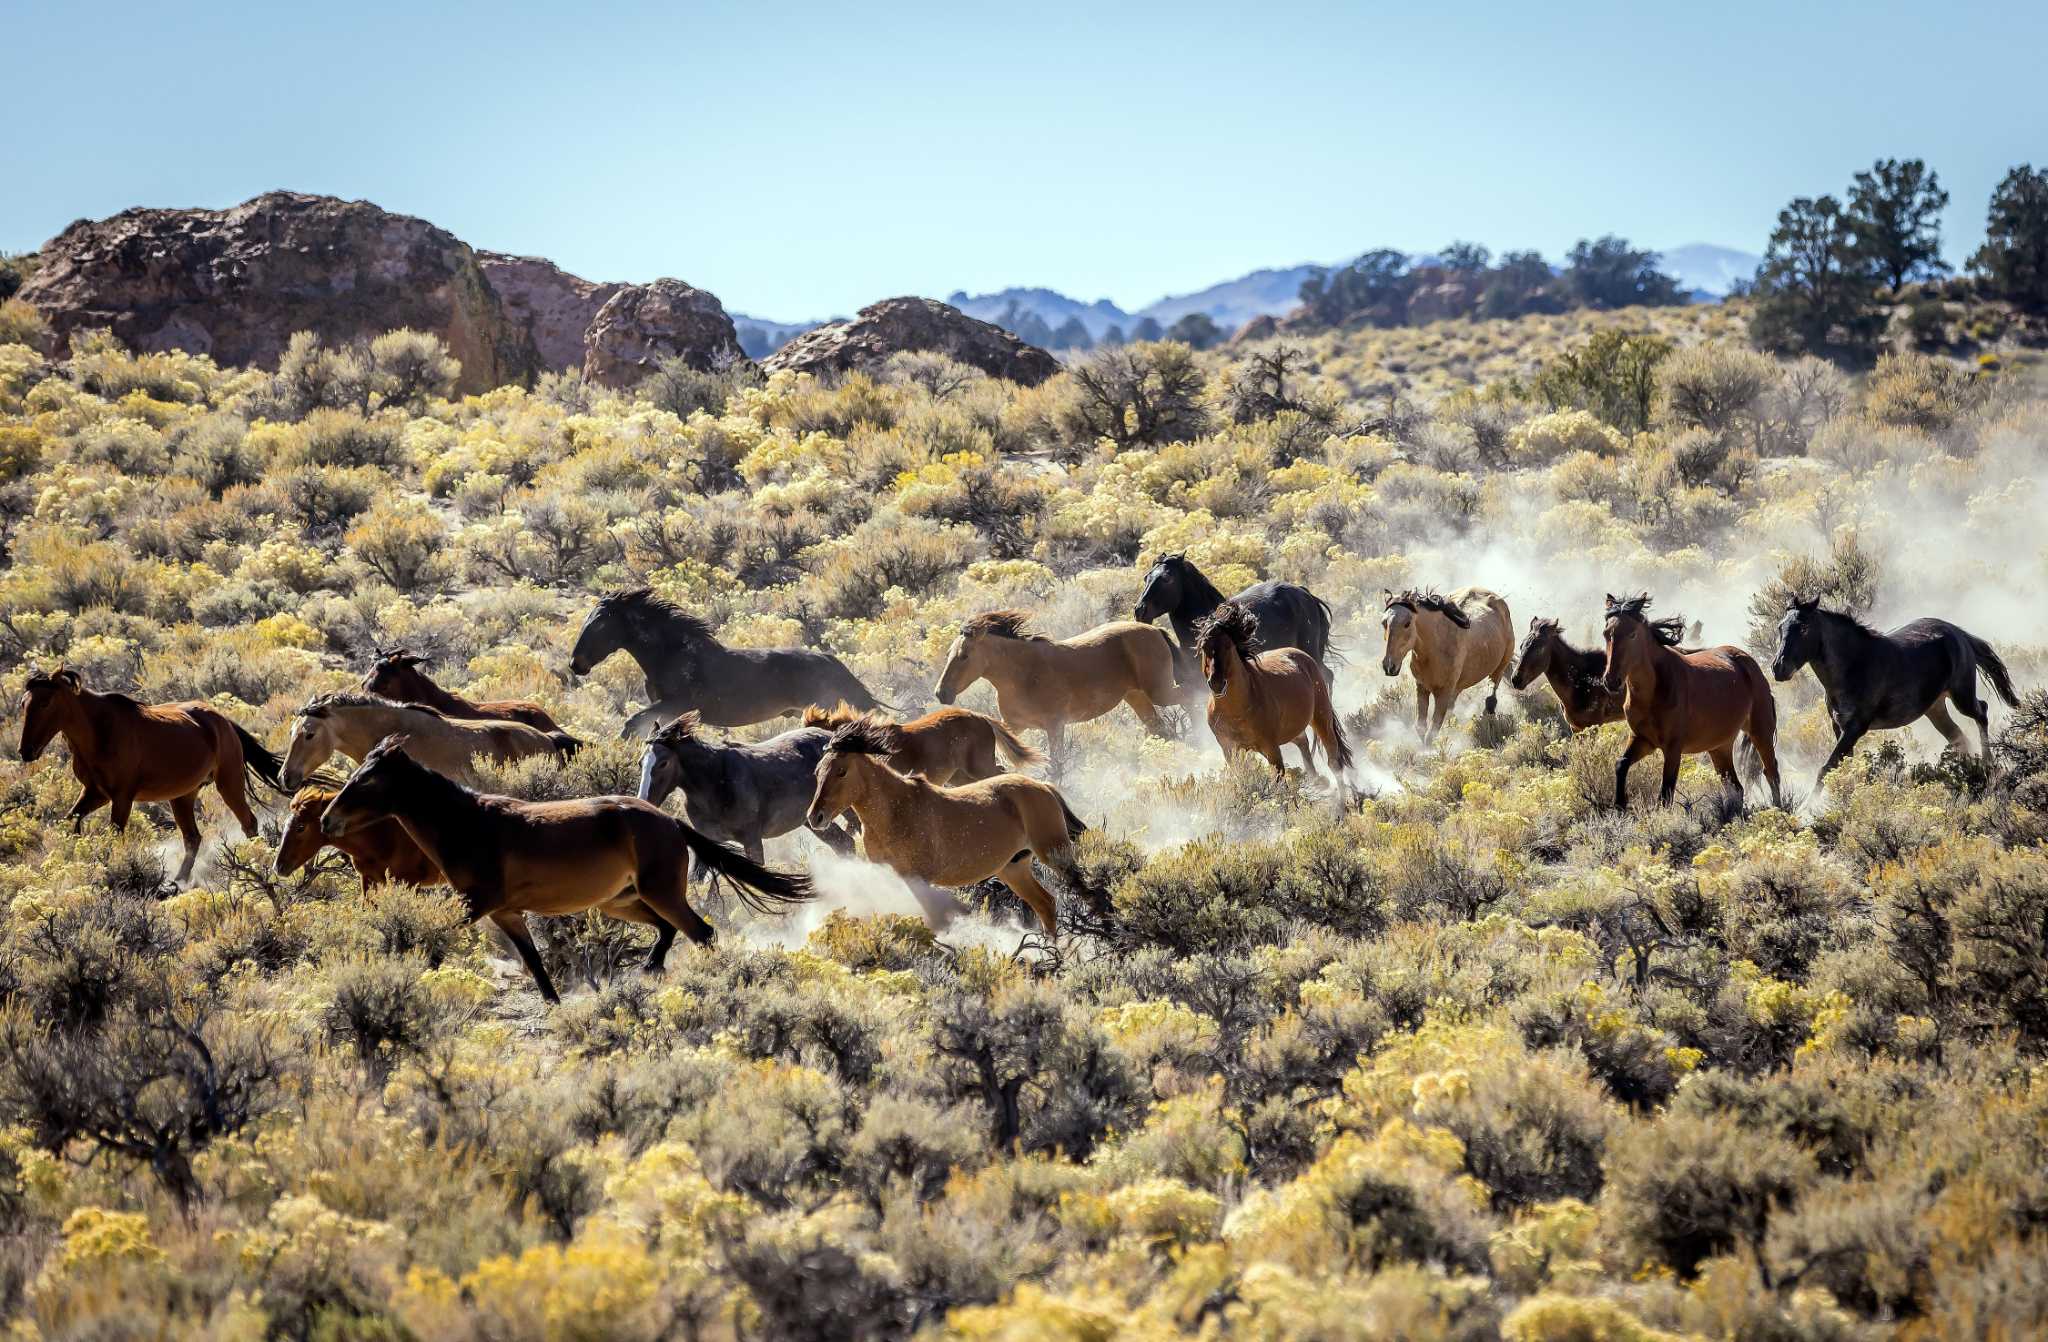 A Herd Of Wild Horses Just Moved Into This Iconic California Destination